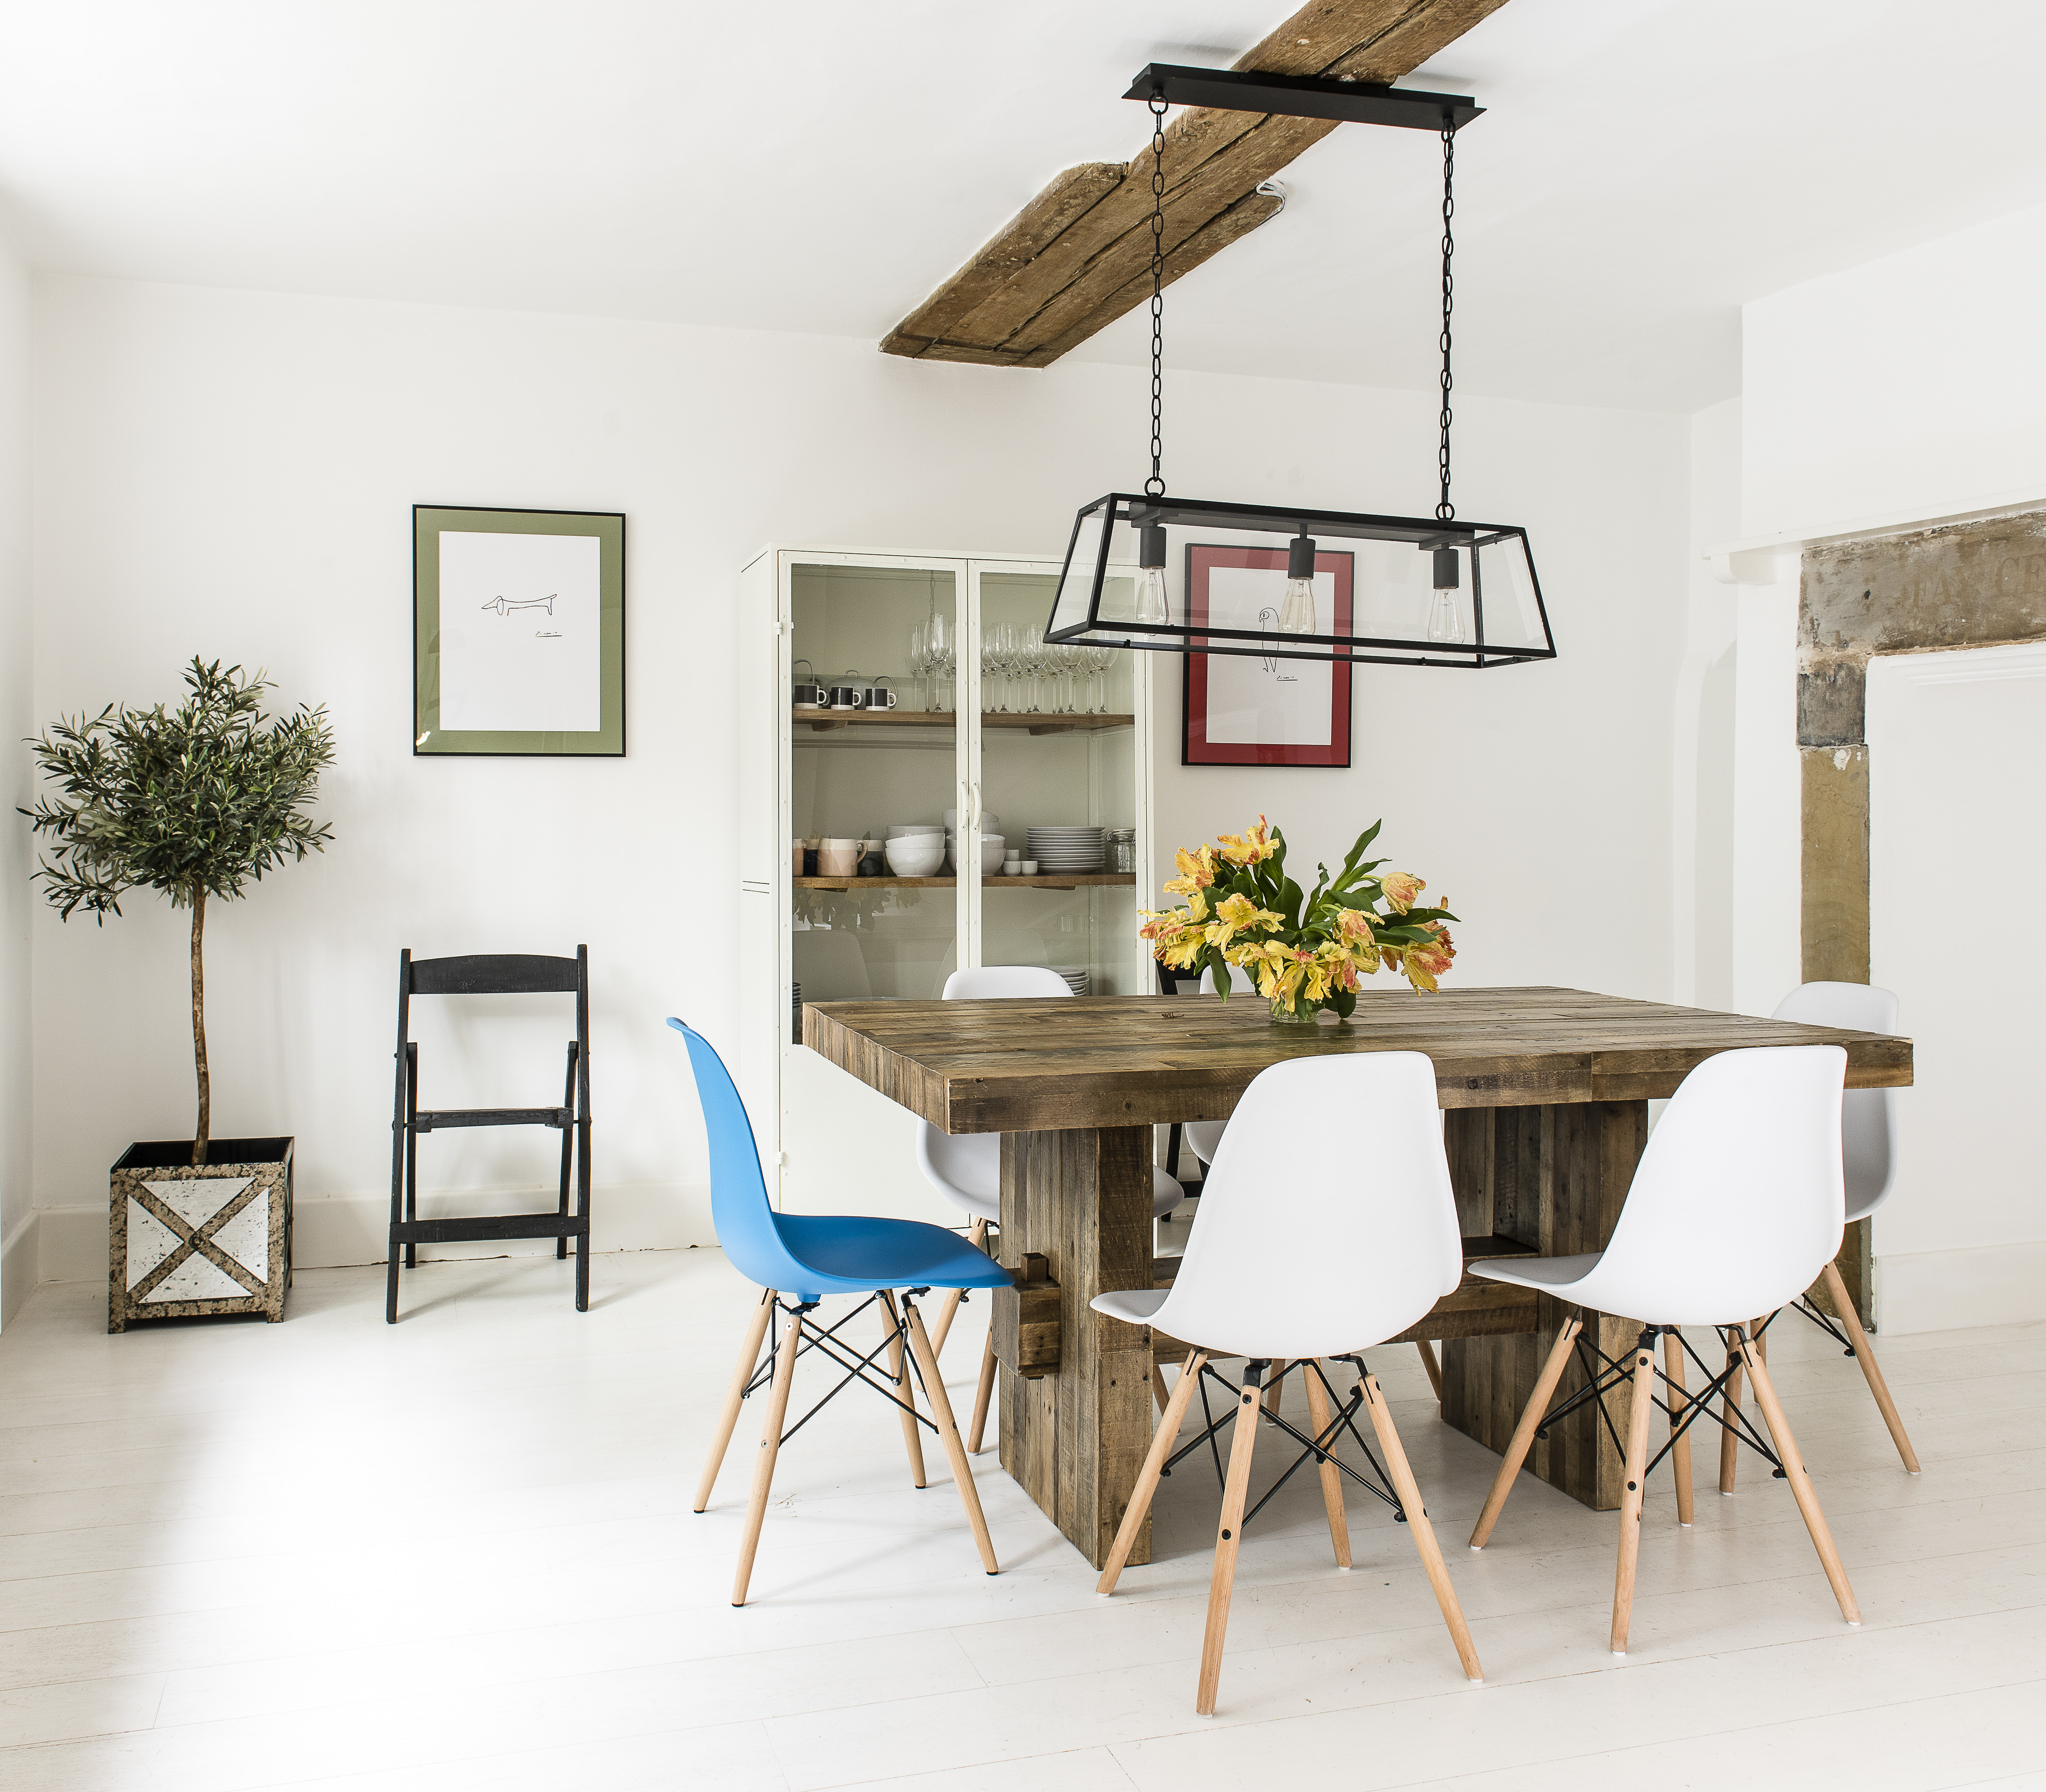 In the family breakfast room, Eames style dining chairs are offset by a chunky oak table, all of which sit below a stripped back central ceiling beam and beside an inglenook fireplace surround.